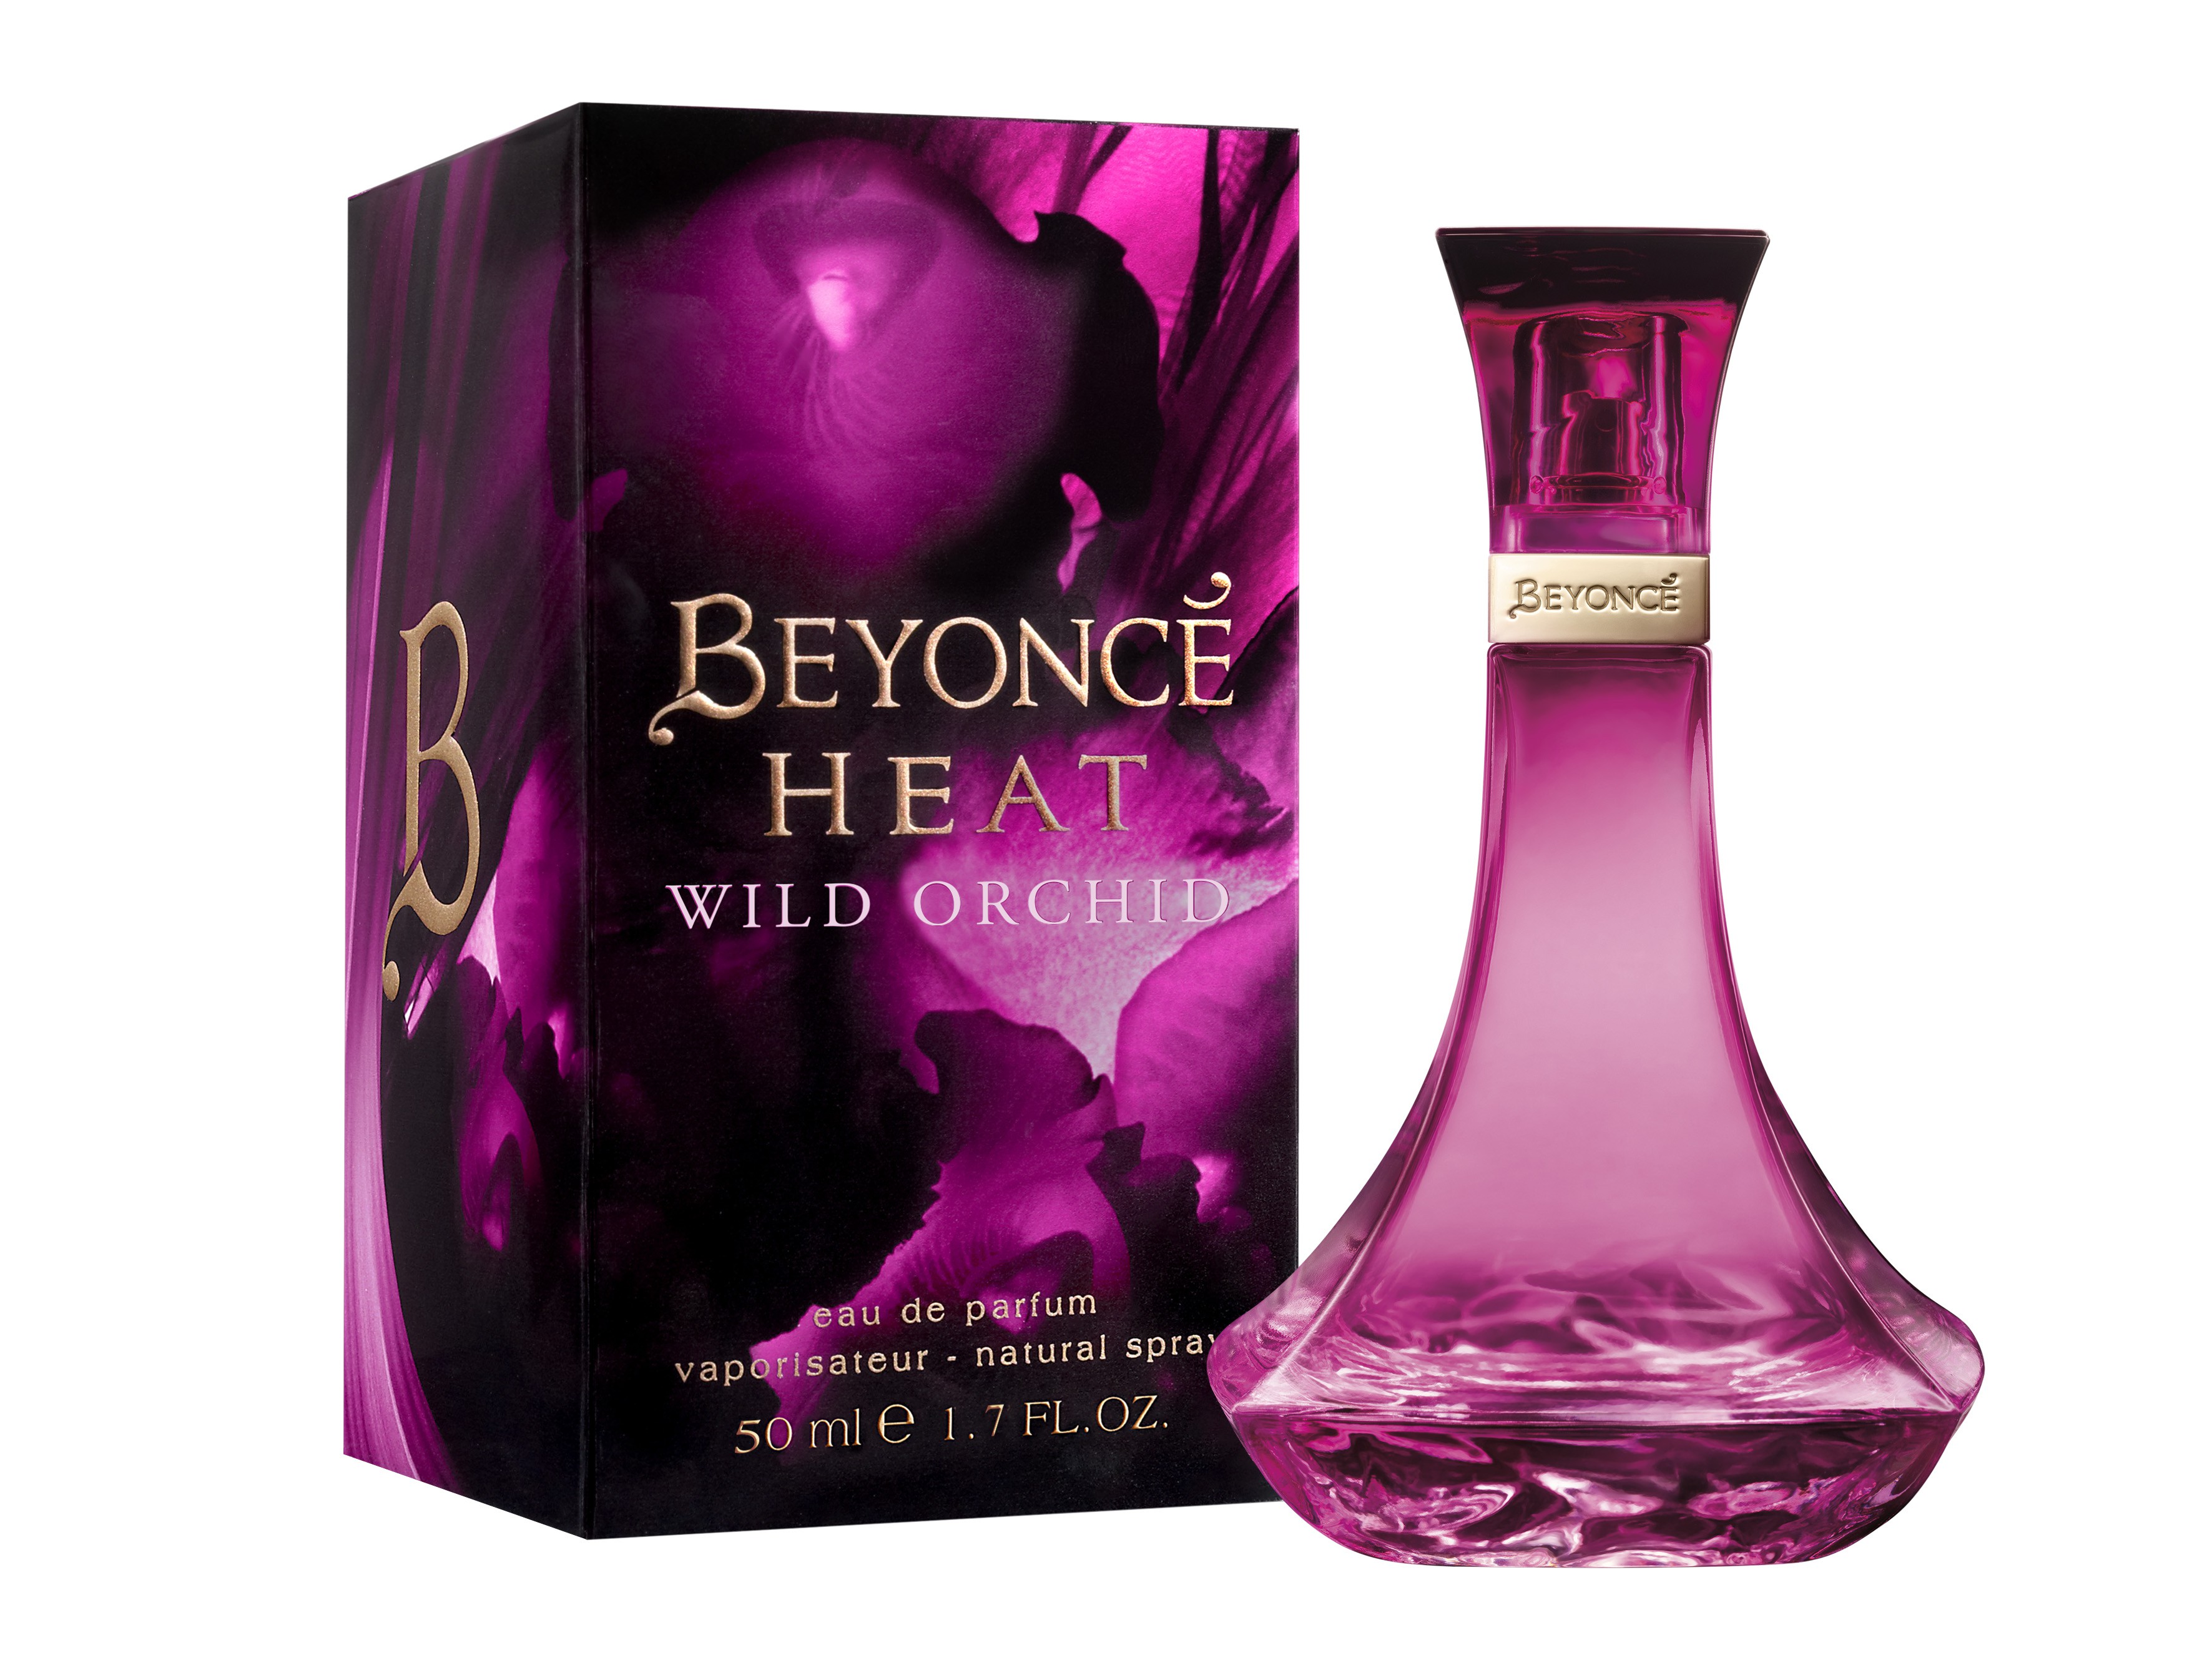 BEYONCE HEAT WILD ORCHID